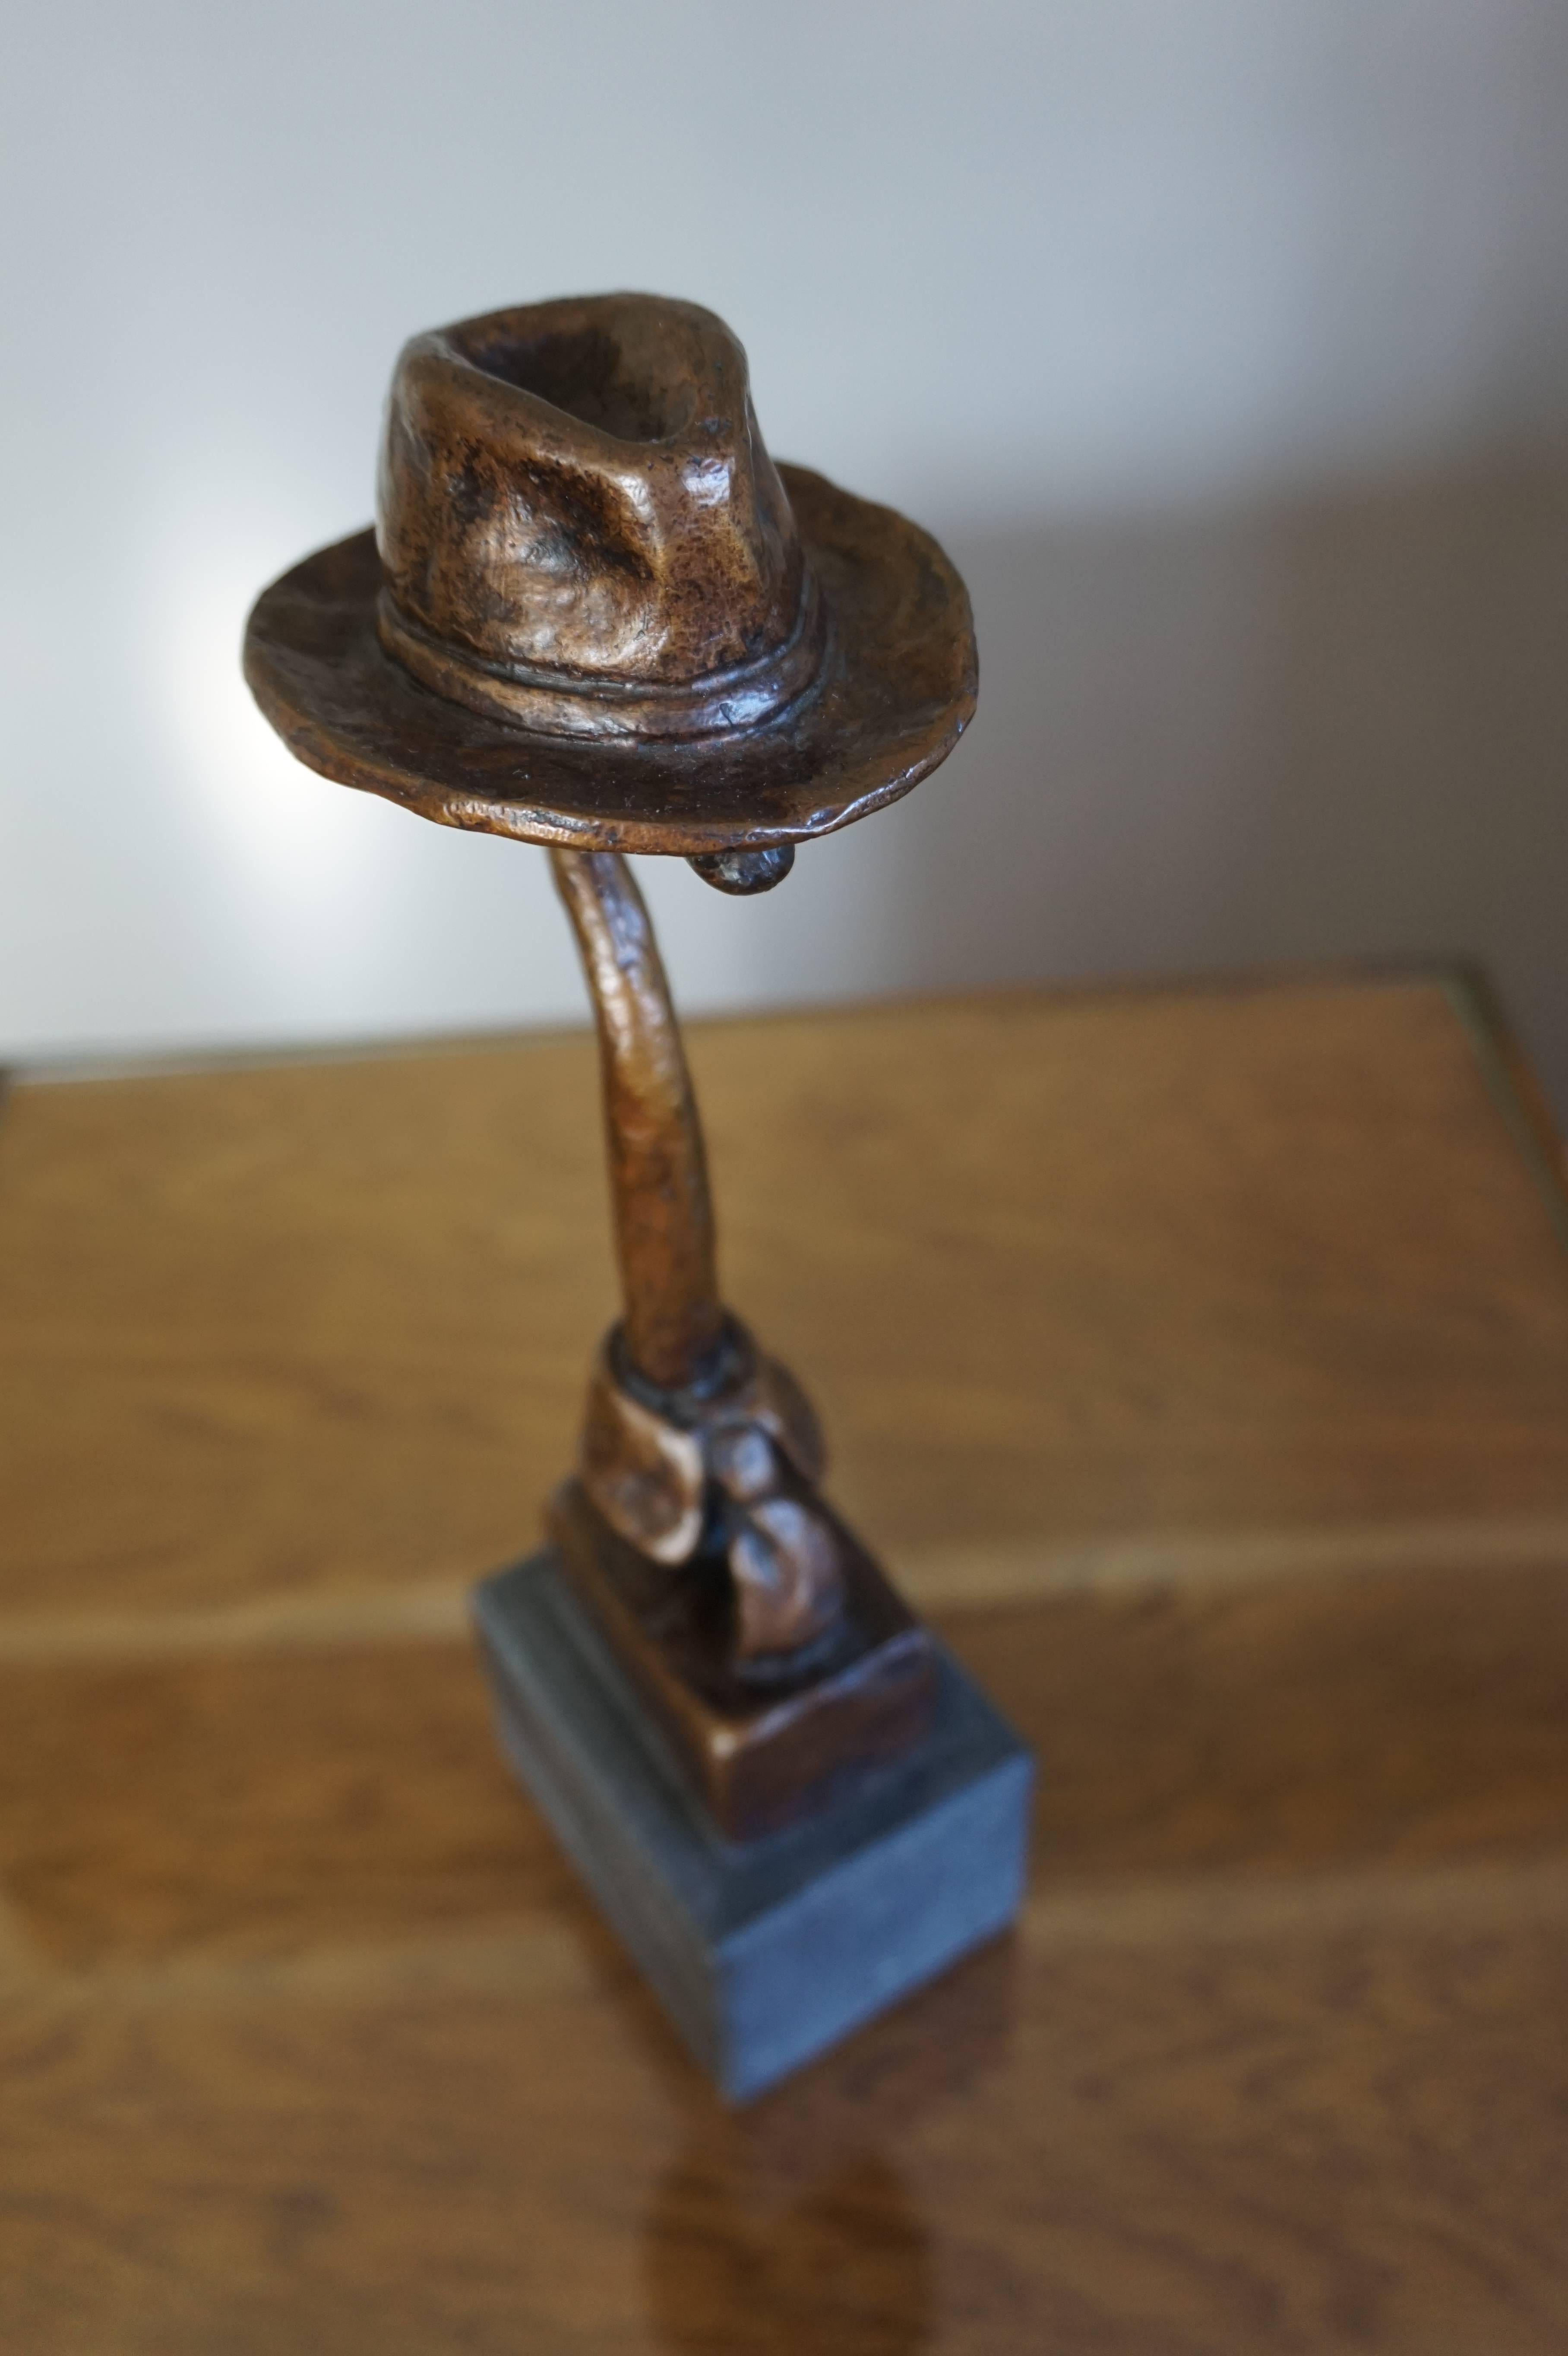 Modern Unique Bronze Fashion Sculpture of Walking Cane in a Hat with Colar & Tie